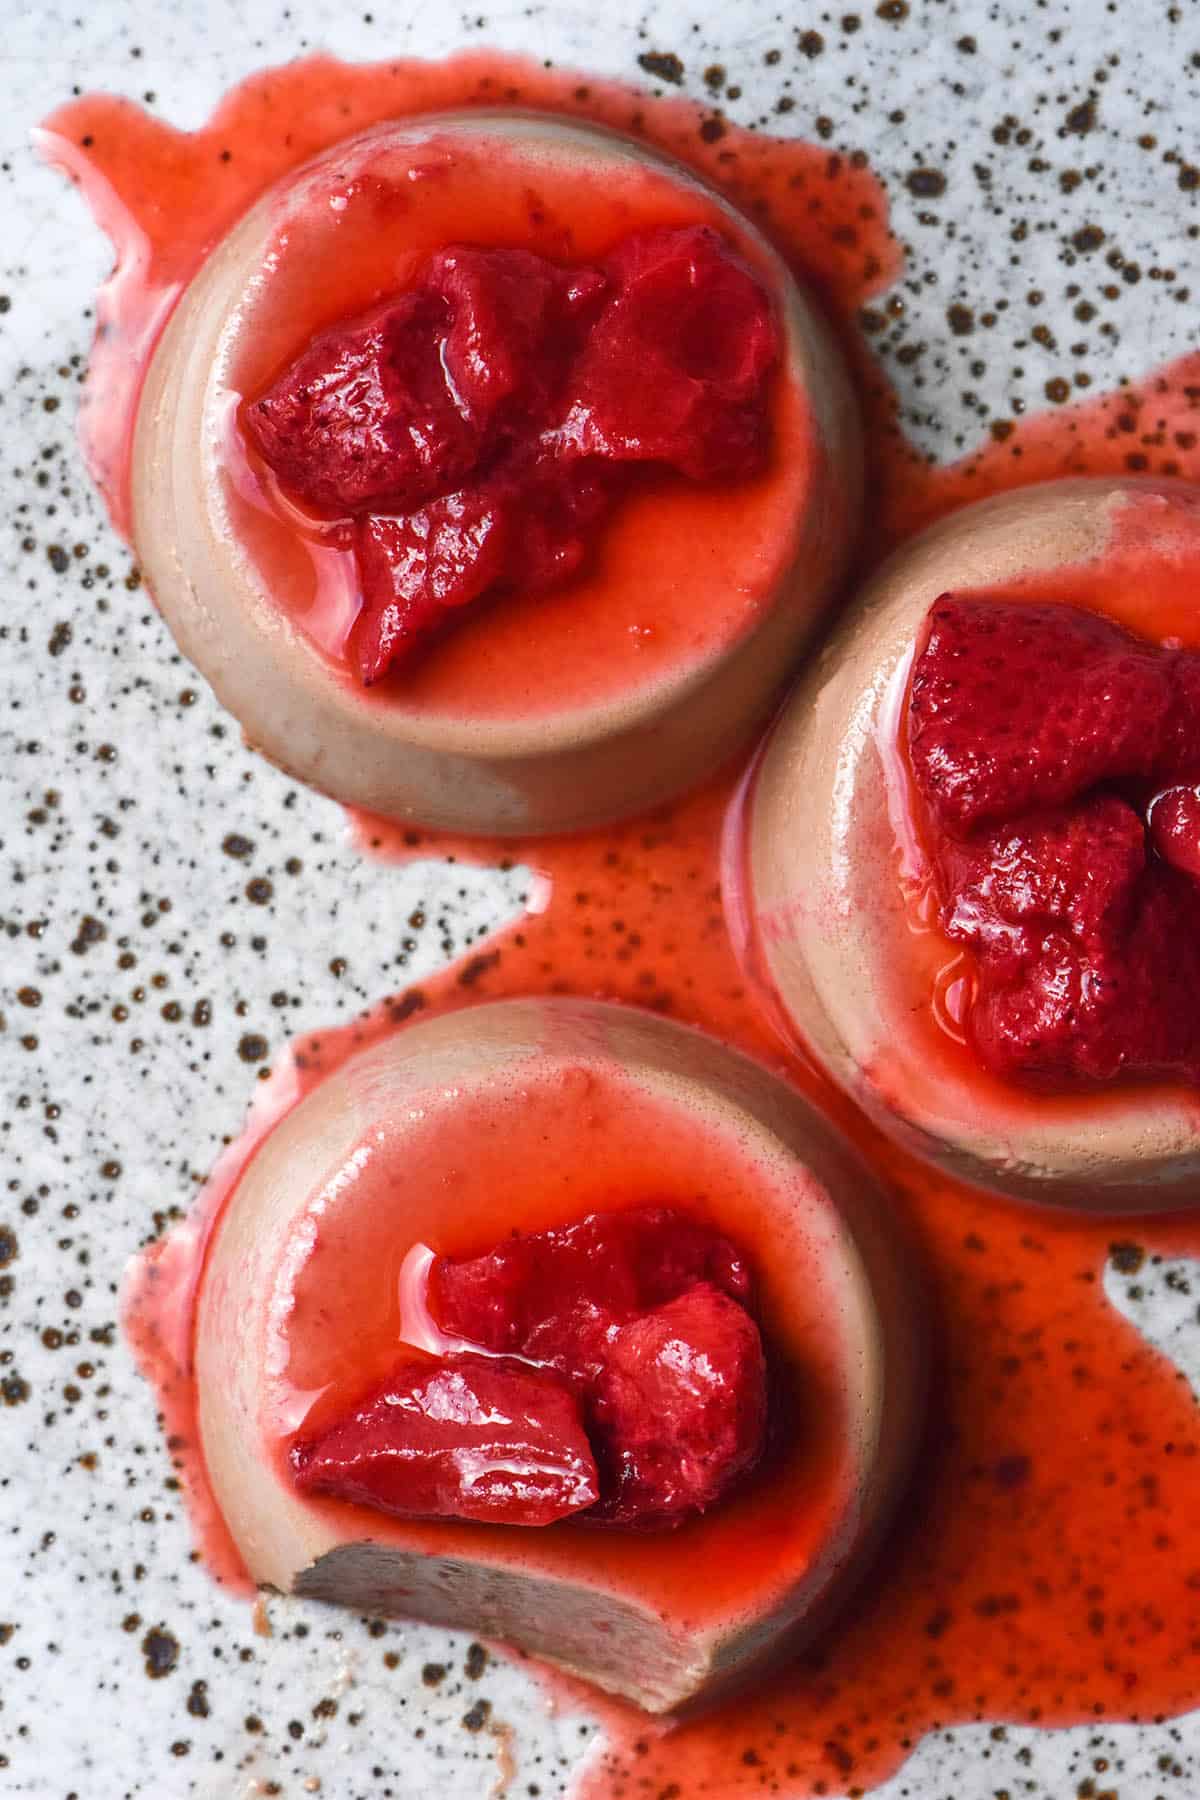 An aerial image of three chocolate panna cotta on a white speckled ceramic plate. The panna cotta are topped with cooked strawberries.